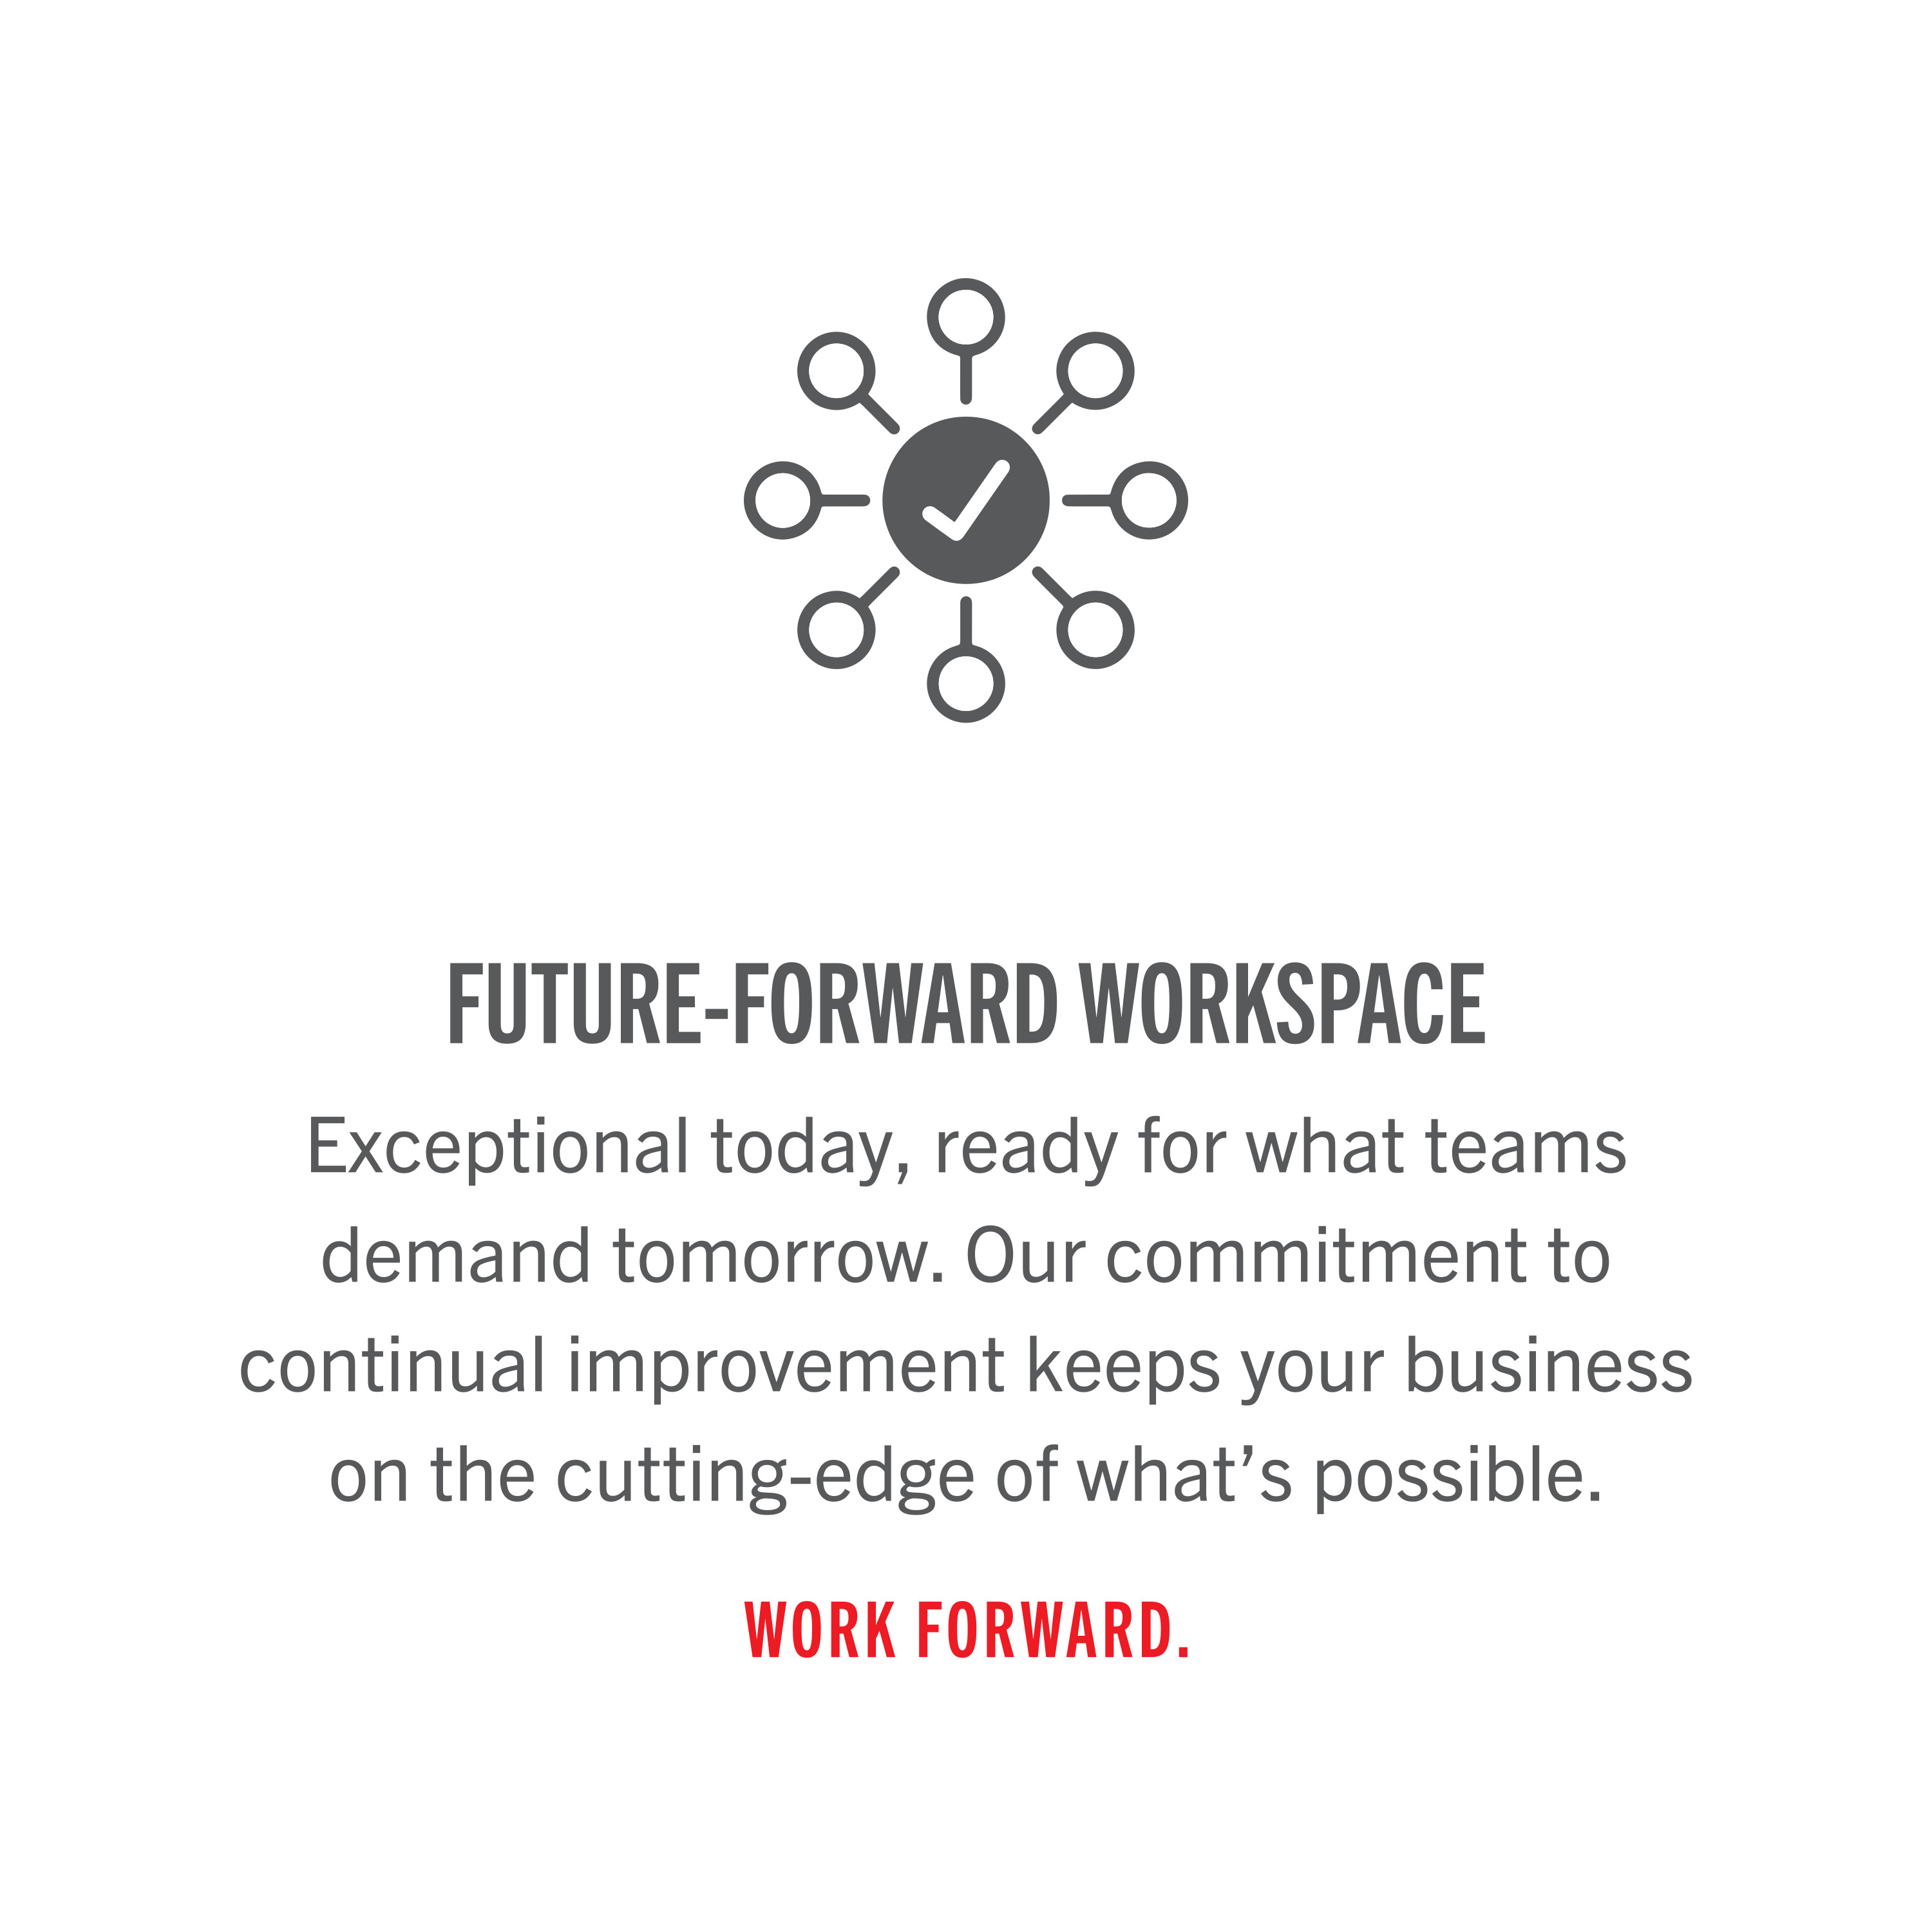 "Exceptional today, ready for what teams demand tomorrow. Our commitment to continual improvement keeps your business on the cutting-edge of what's possible. Work forward."